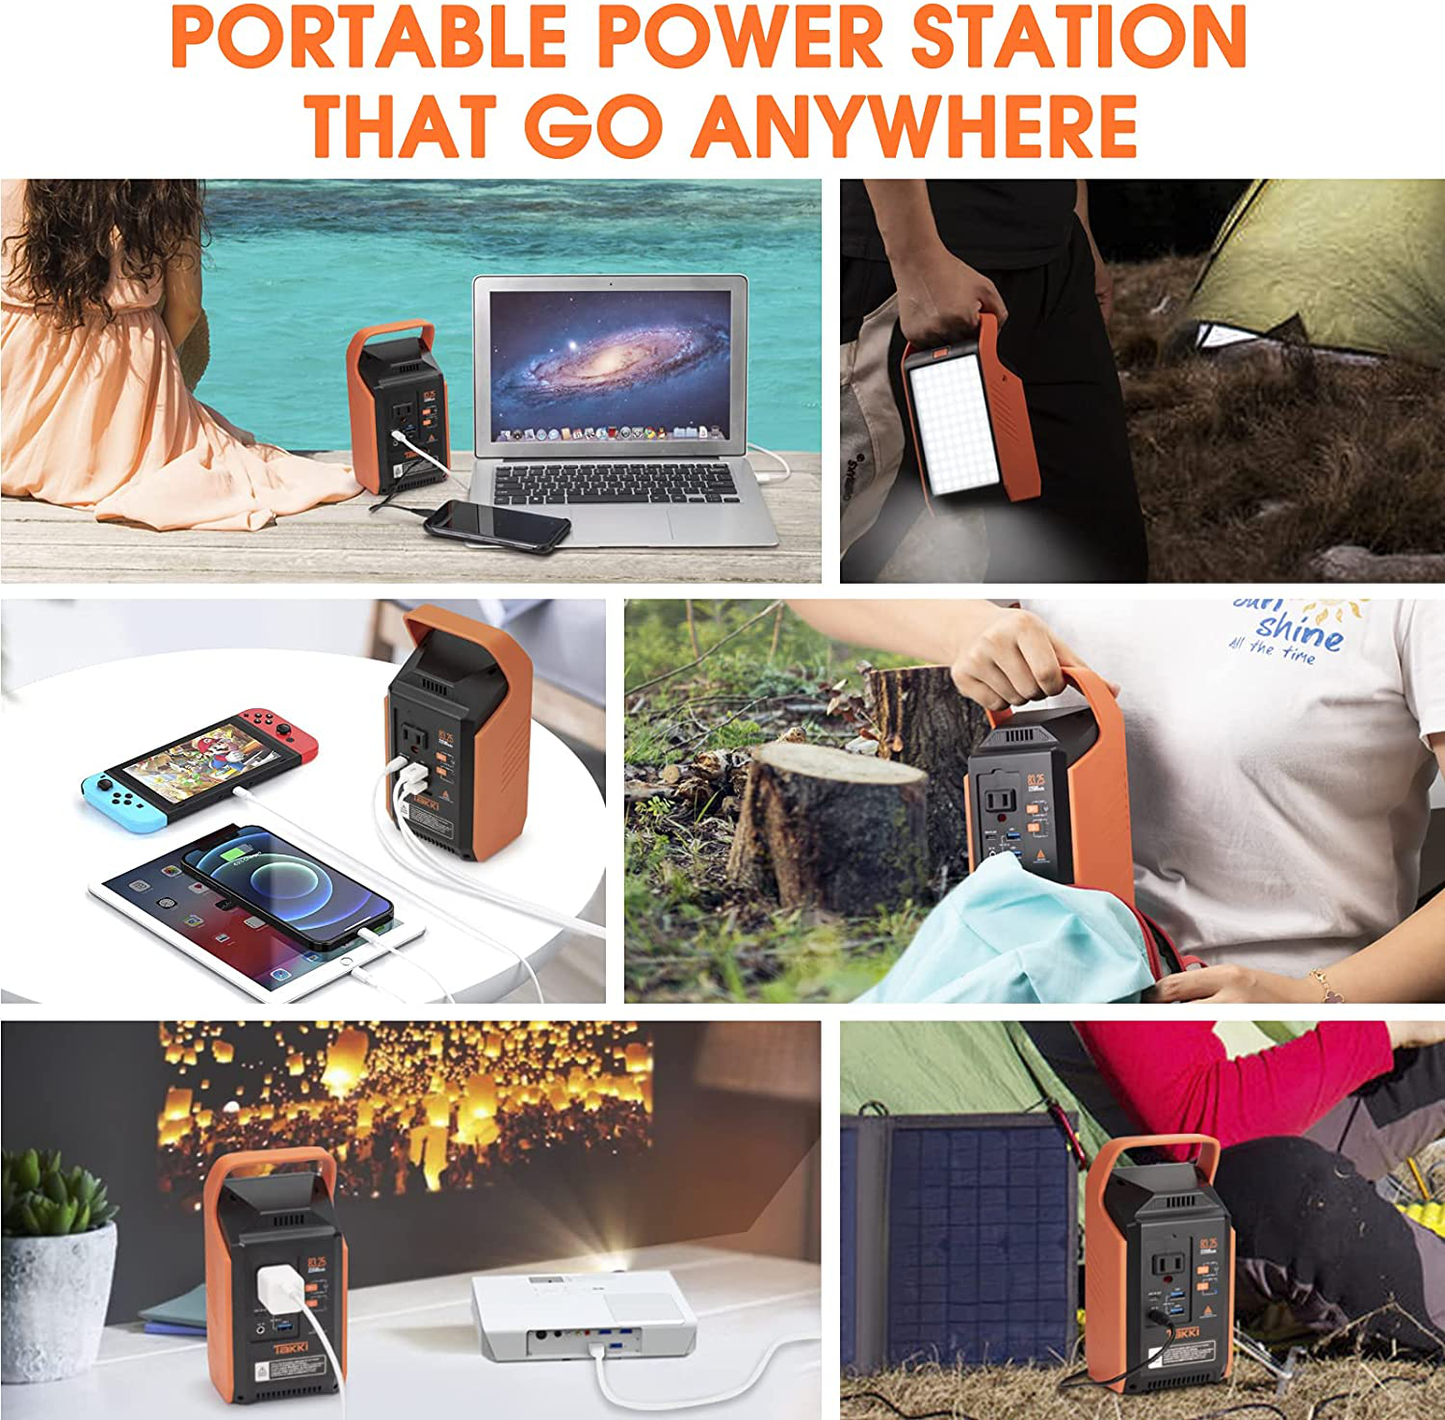 83Wh Portable Power Station, Solar Generator Power Bank with AC Battery Backup and Camping Lights for School, Camping, Home Use, Laptops, Fan Road Trip, Emergency Supplies(Solar Panel Not Included)